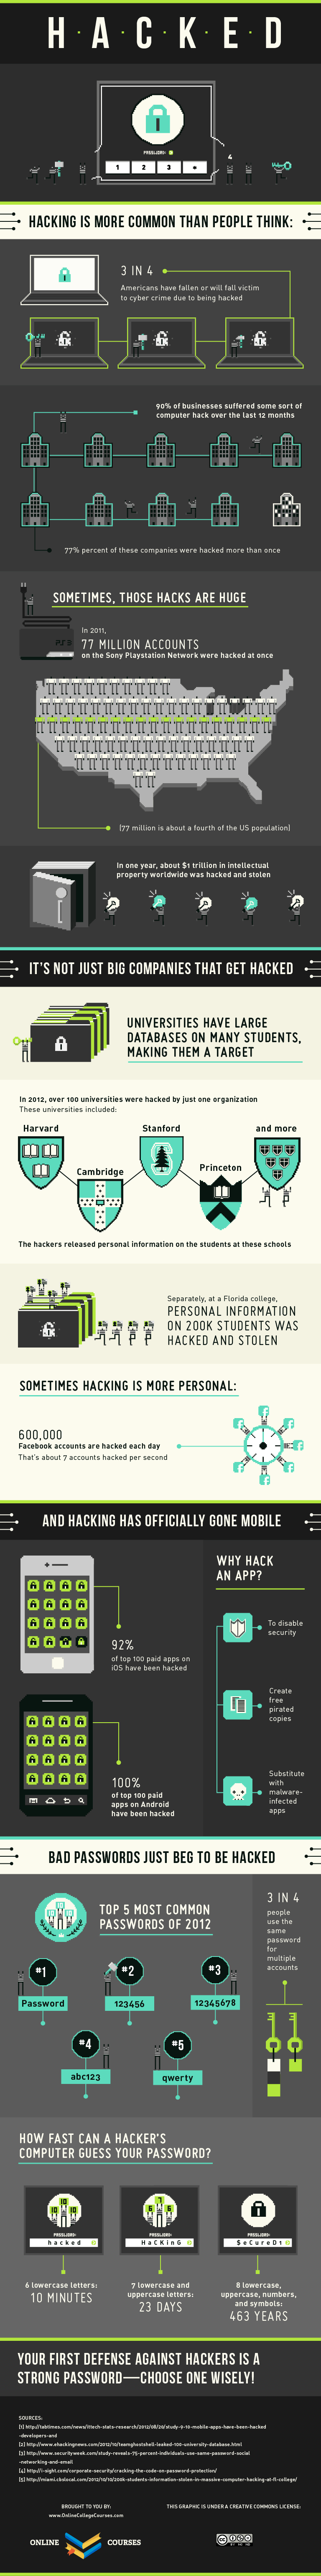 Hacked Infographic